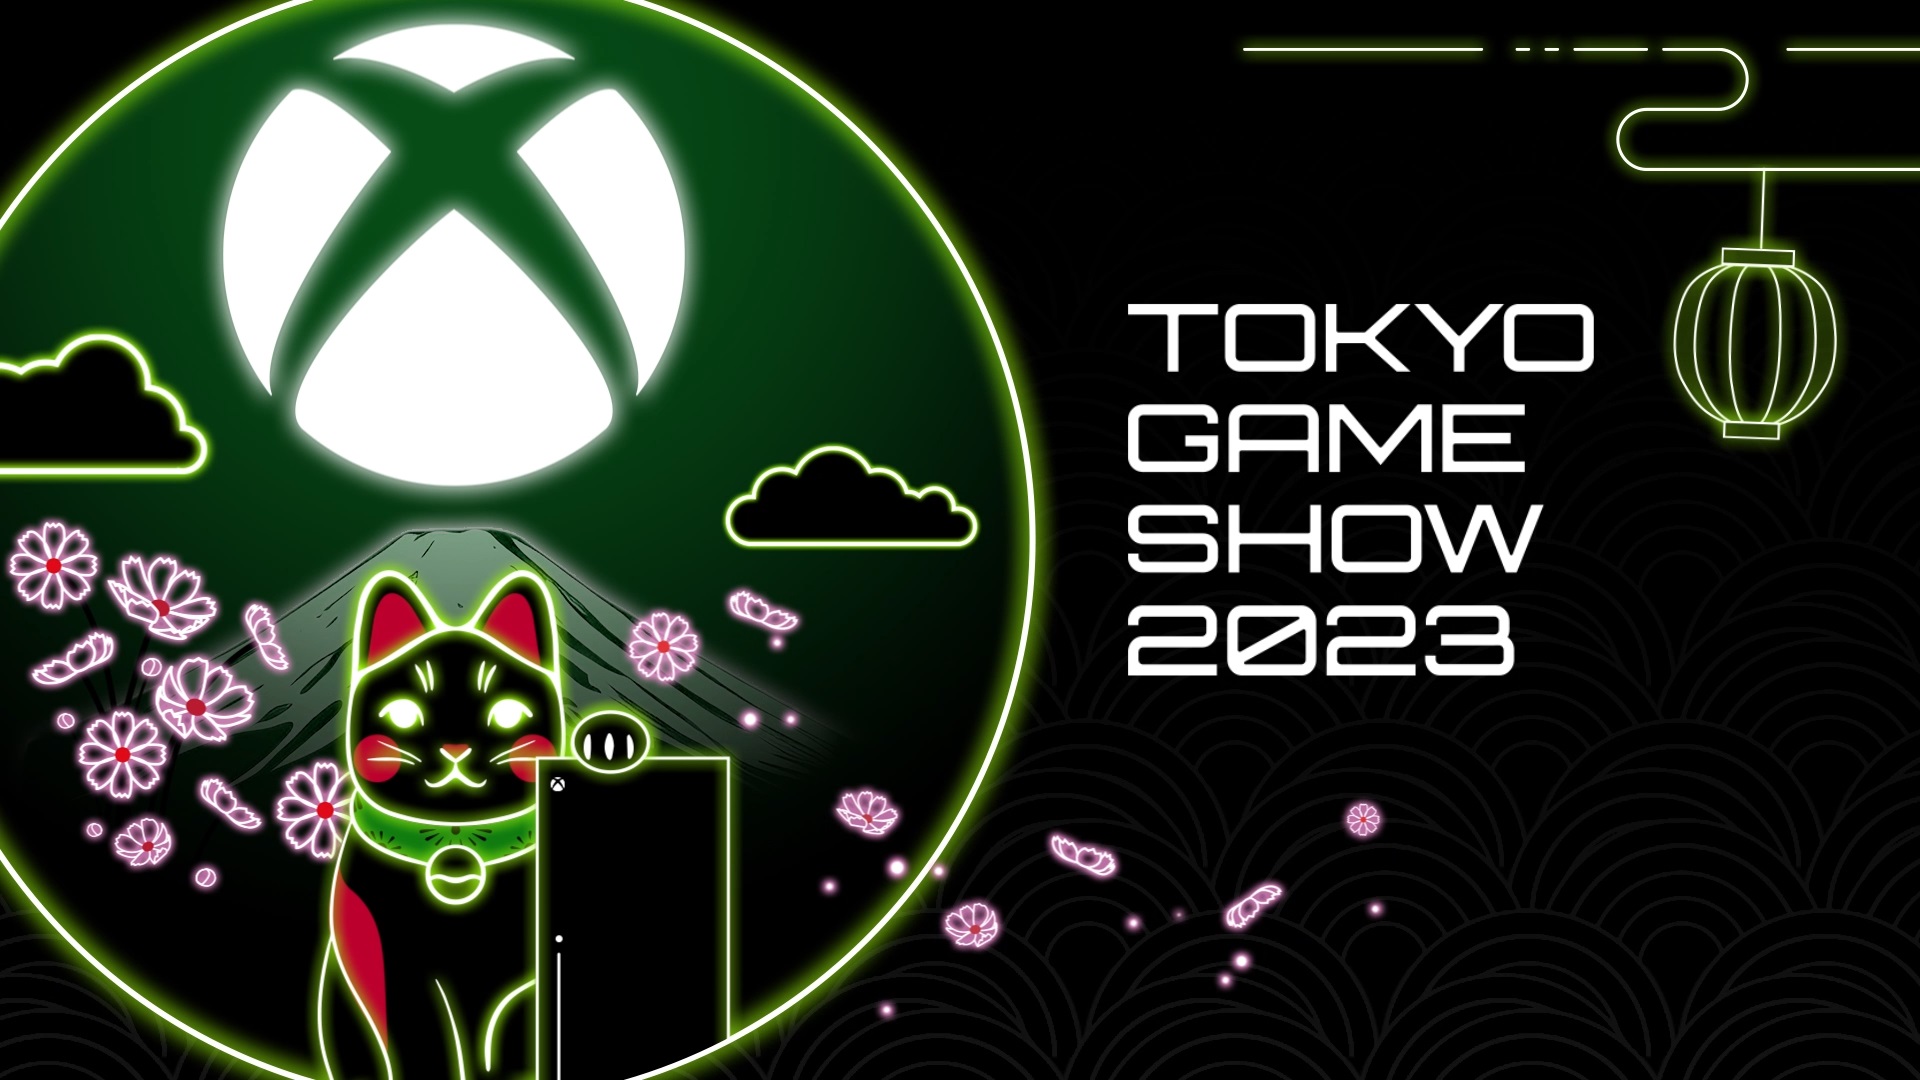 Xbox Digital Broadcast Confirmed for TGS 2023 on September 21